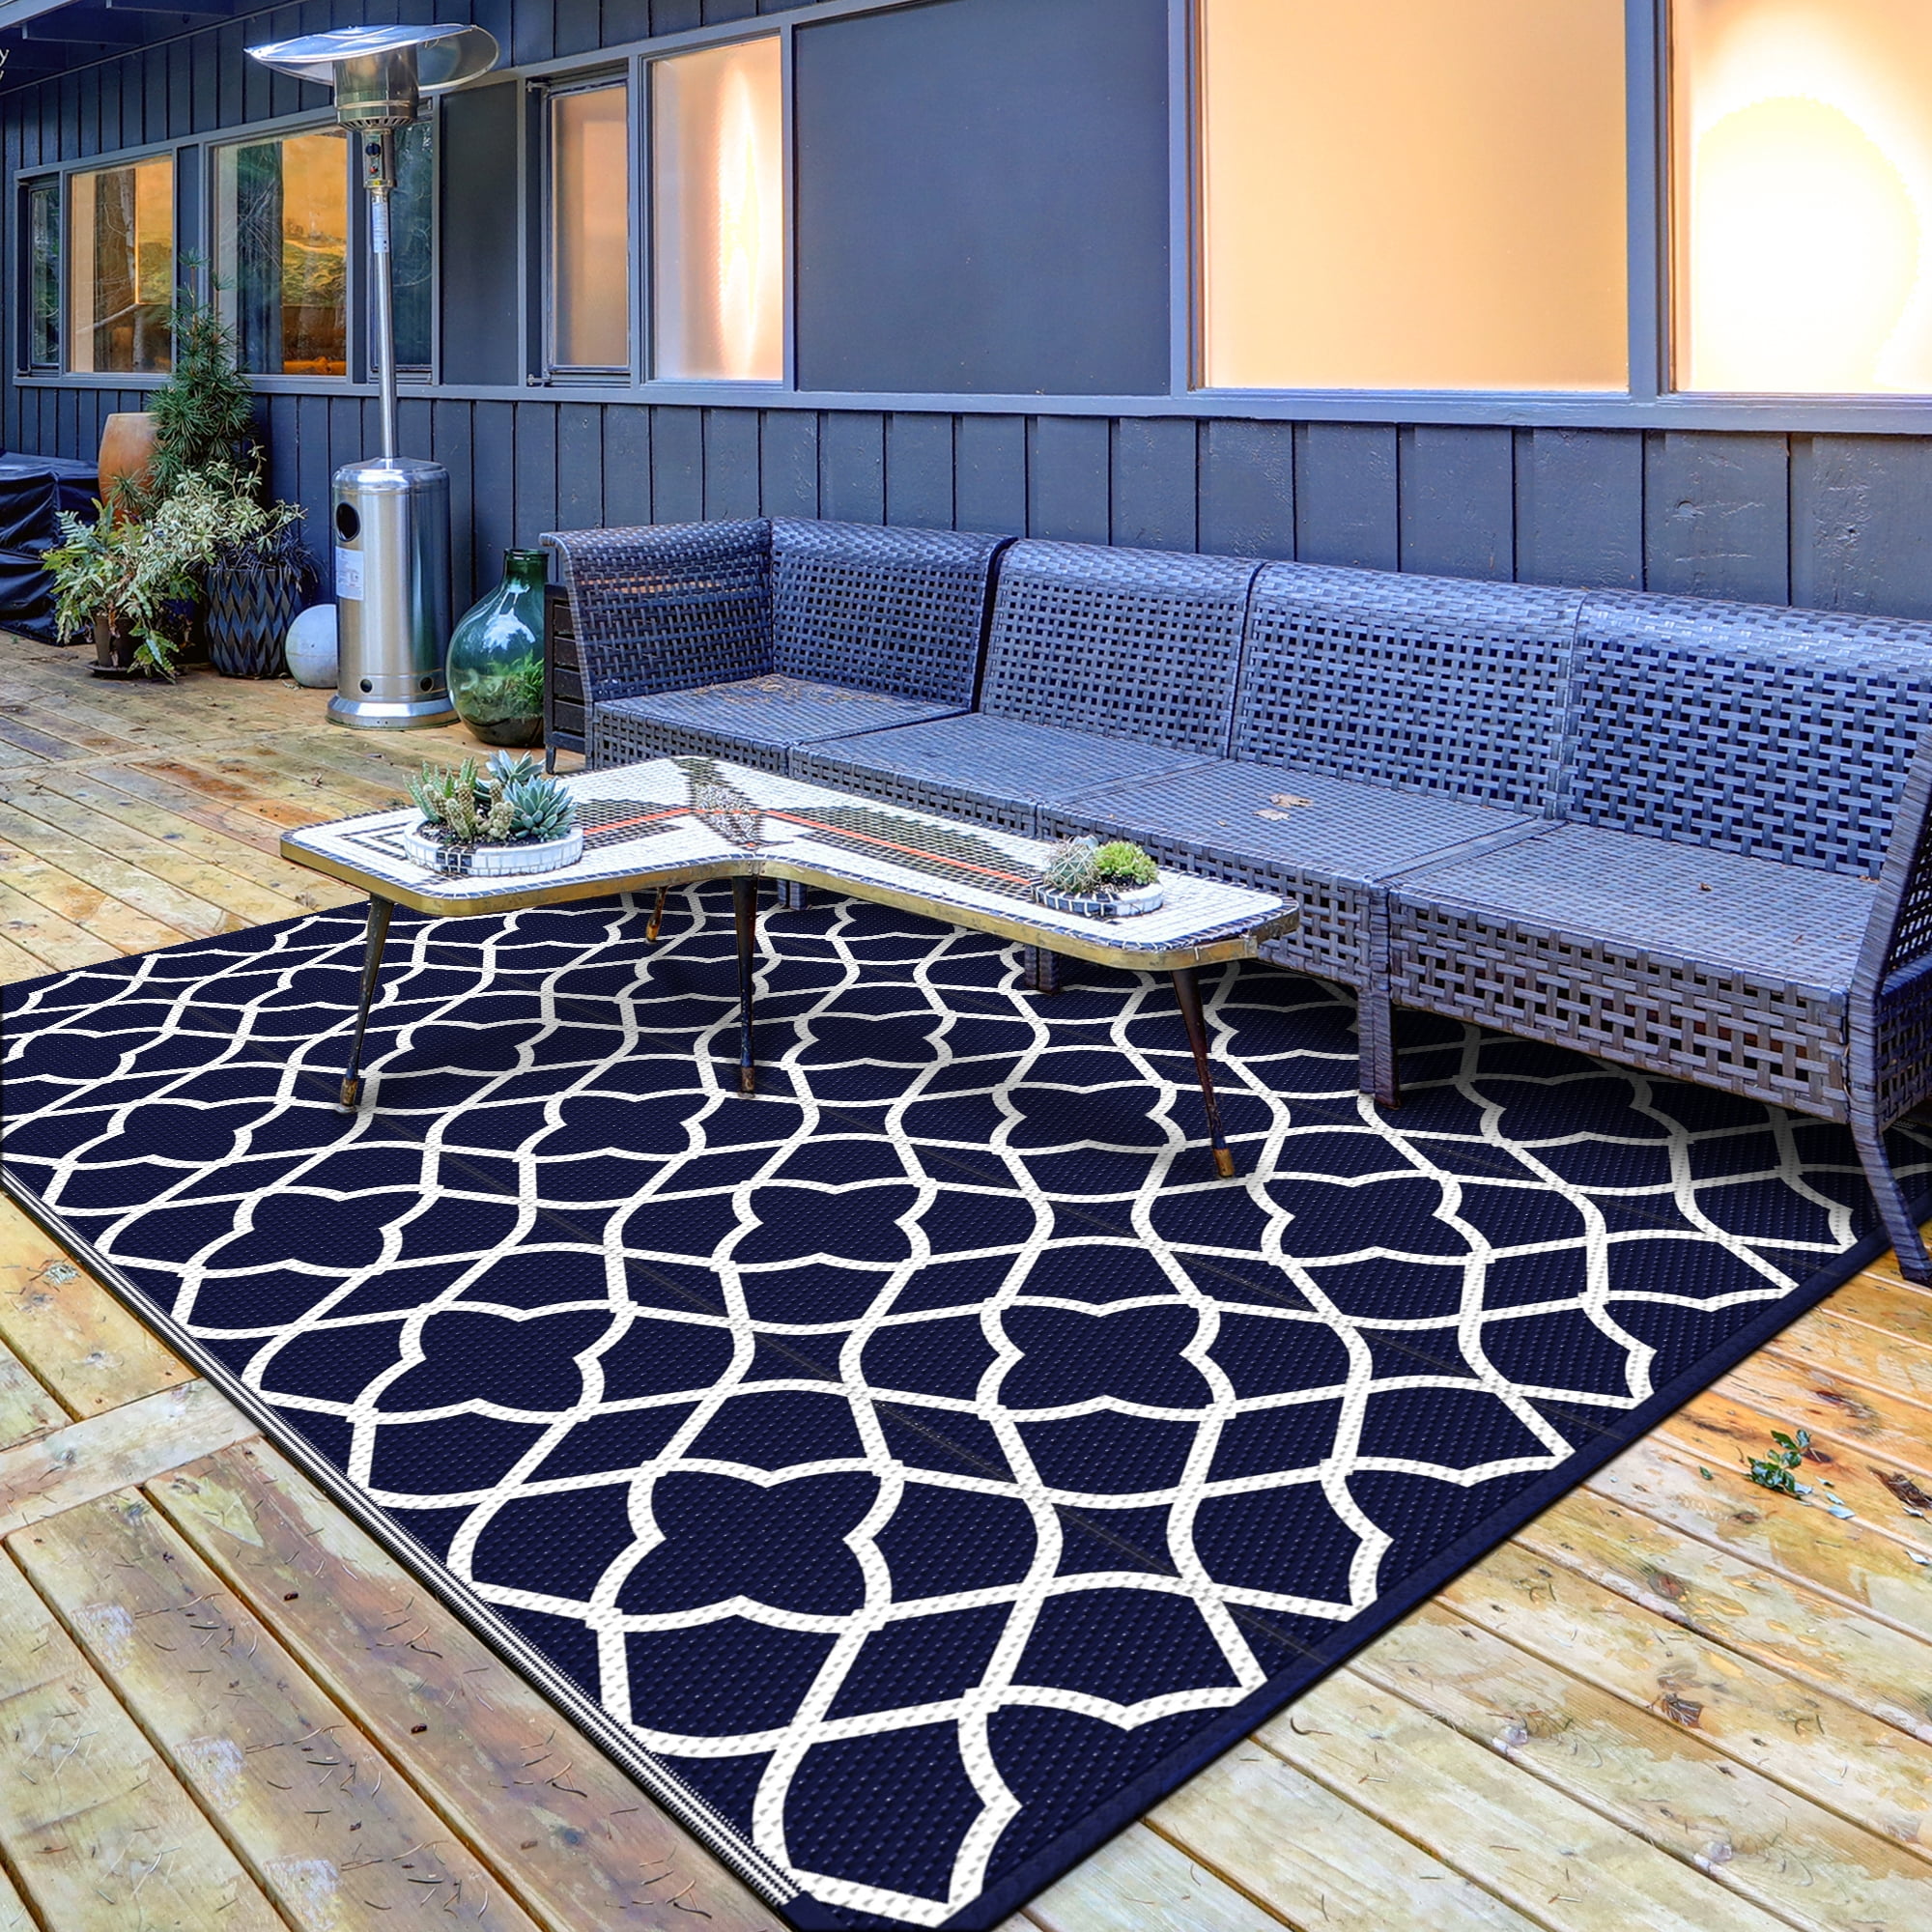 wikiwiki Outdoor Rug, 9x12ft Waterproof Reversible Mat Indoor Outdoor Rugs  Carpet, Small Area Rug Plastic Straw Rug for Patio Deck Balcony Pool RV